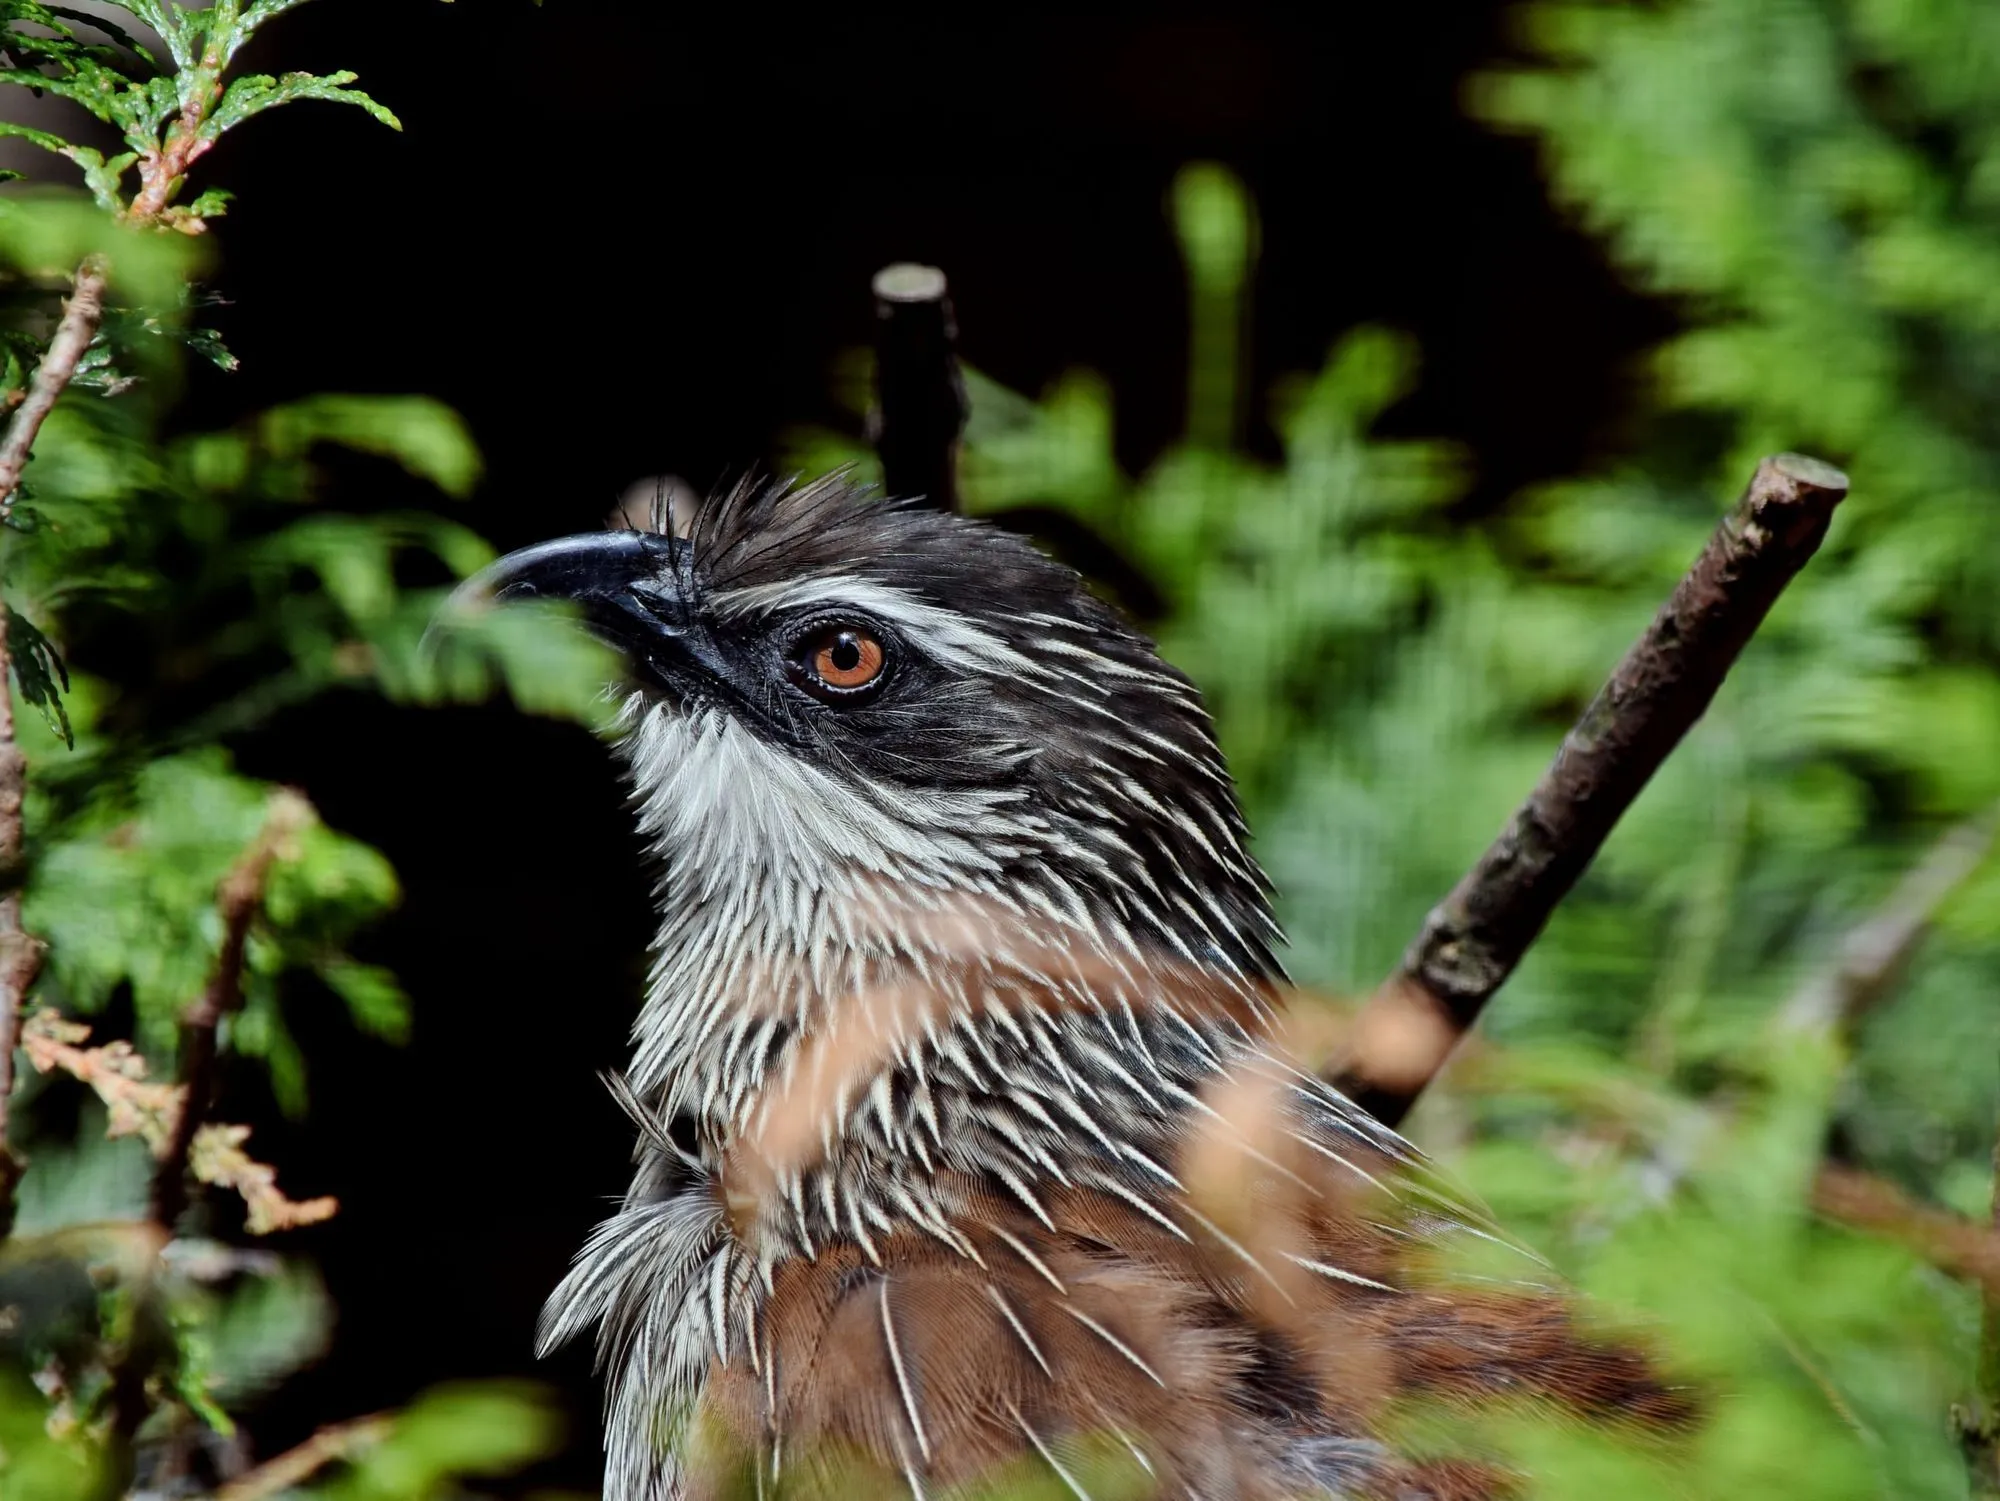 White-browed coucal facts illustrate everything about their appearance and young.